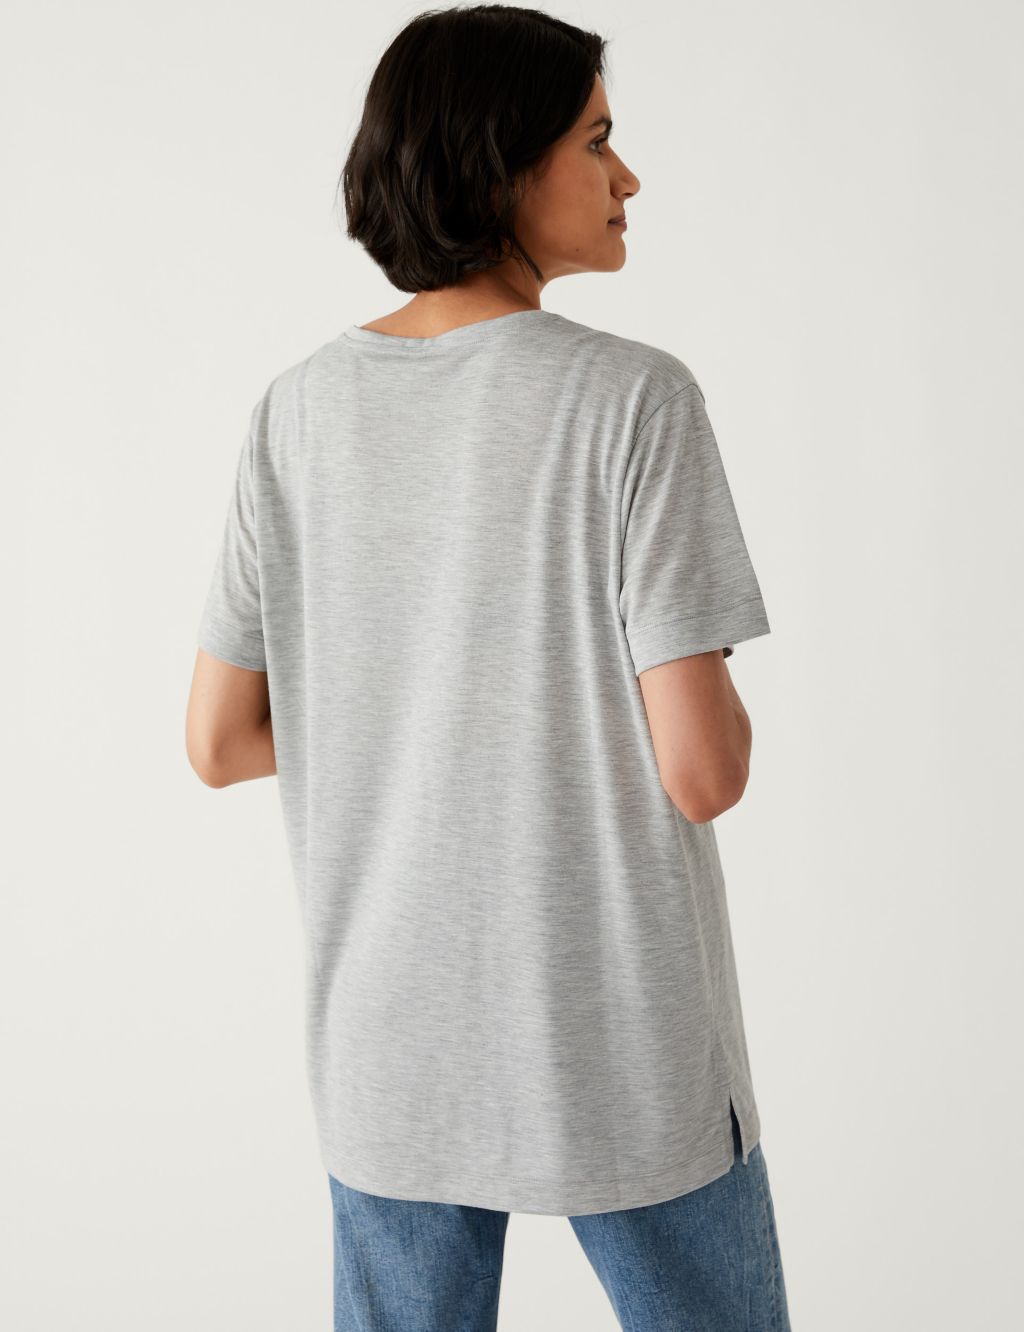 Relaxed Longline T-Shirt image 3